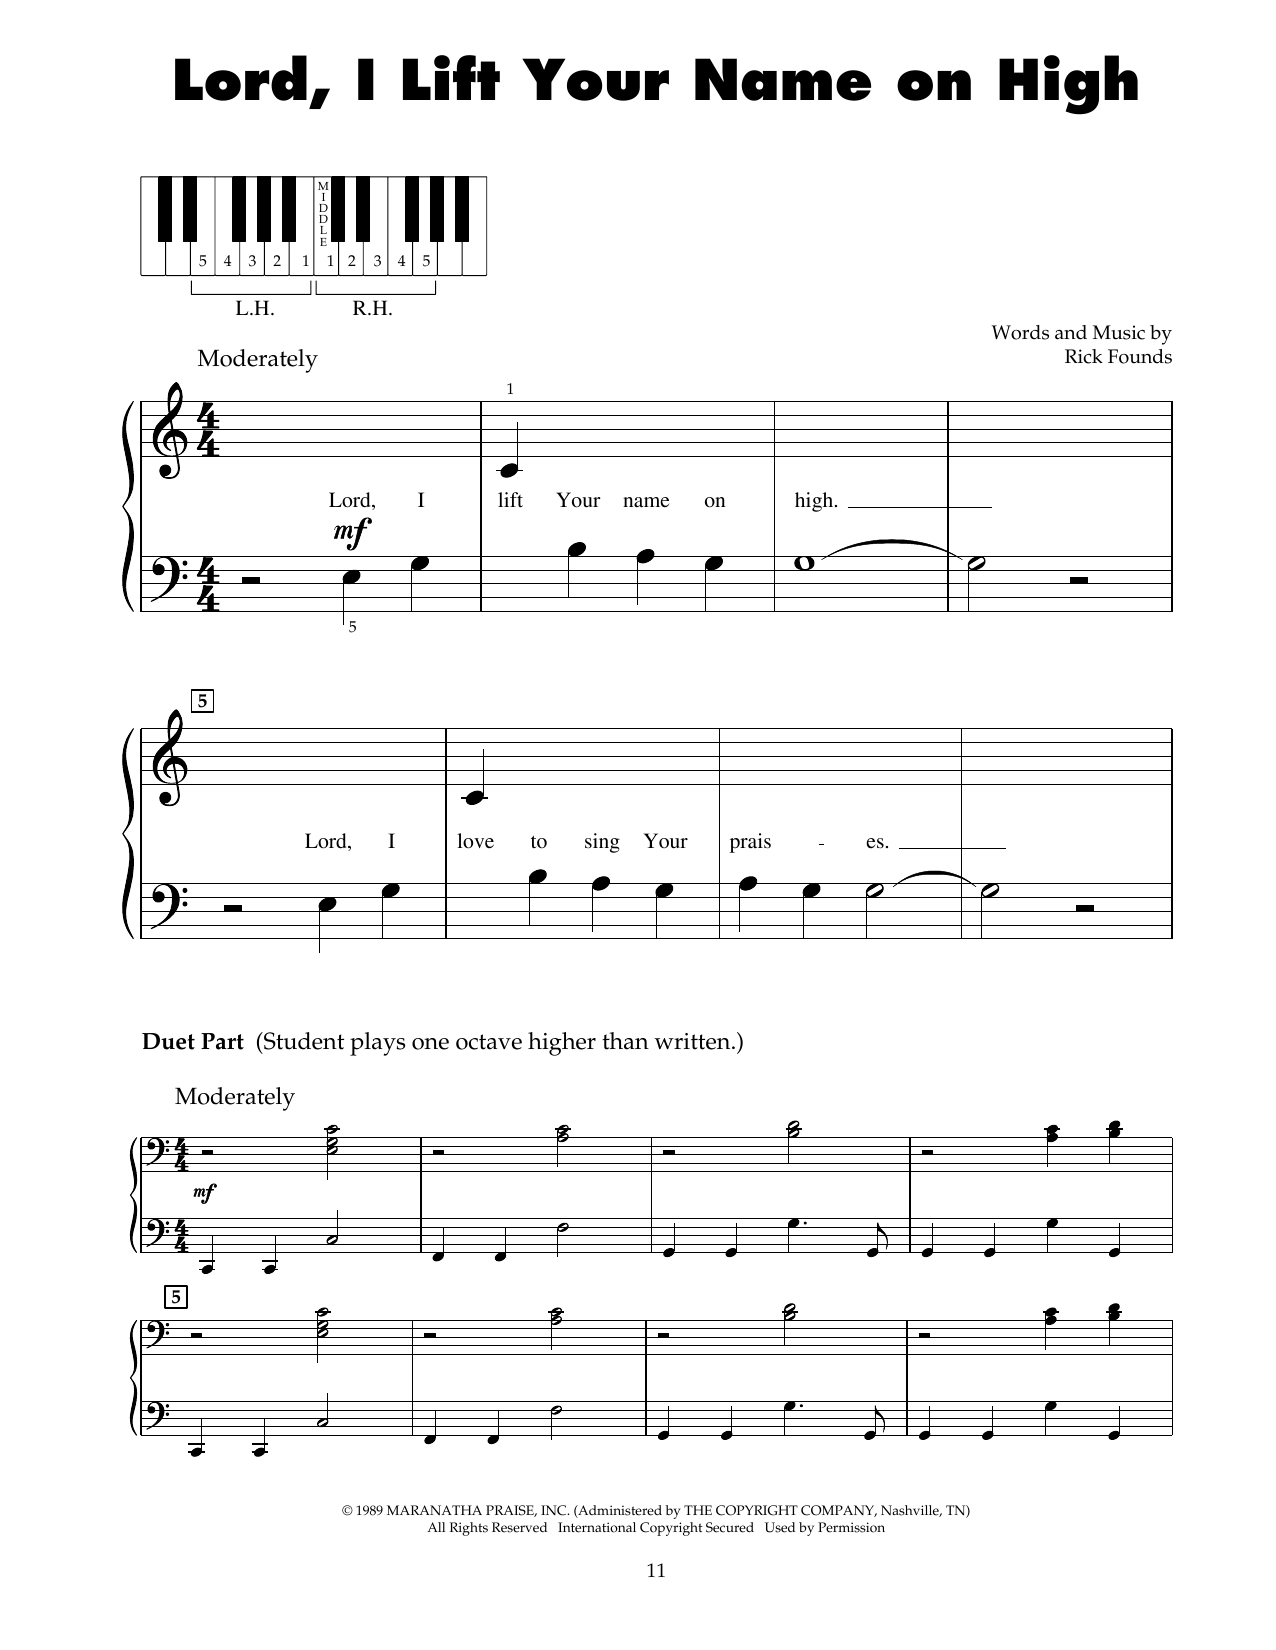 Download Rick Founds Lord, I Lift Your Name On High Sheet Music